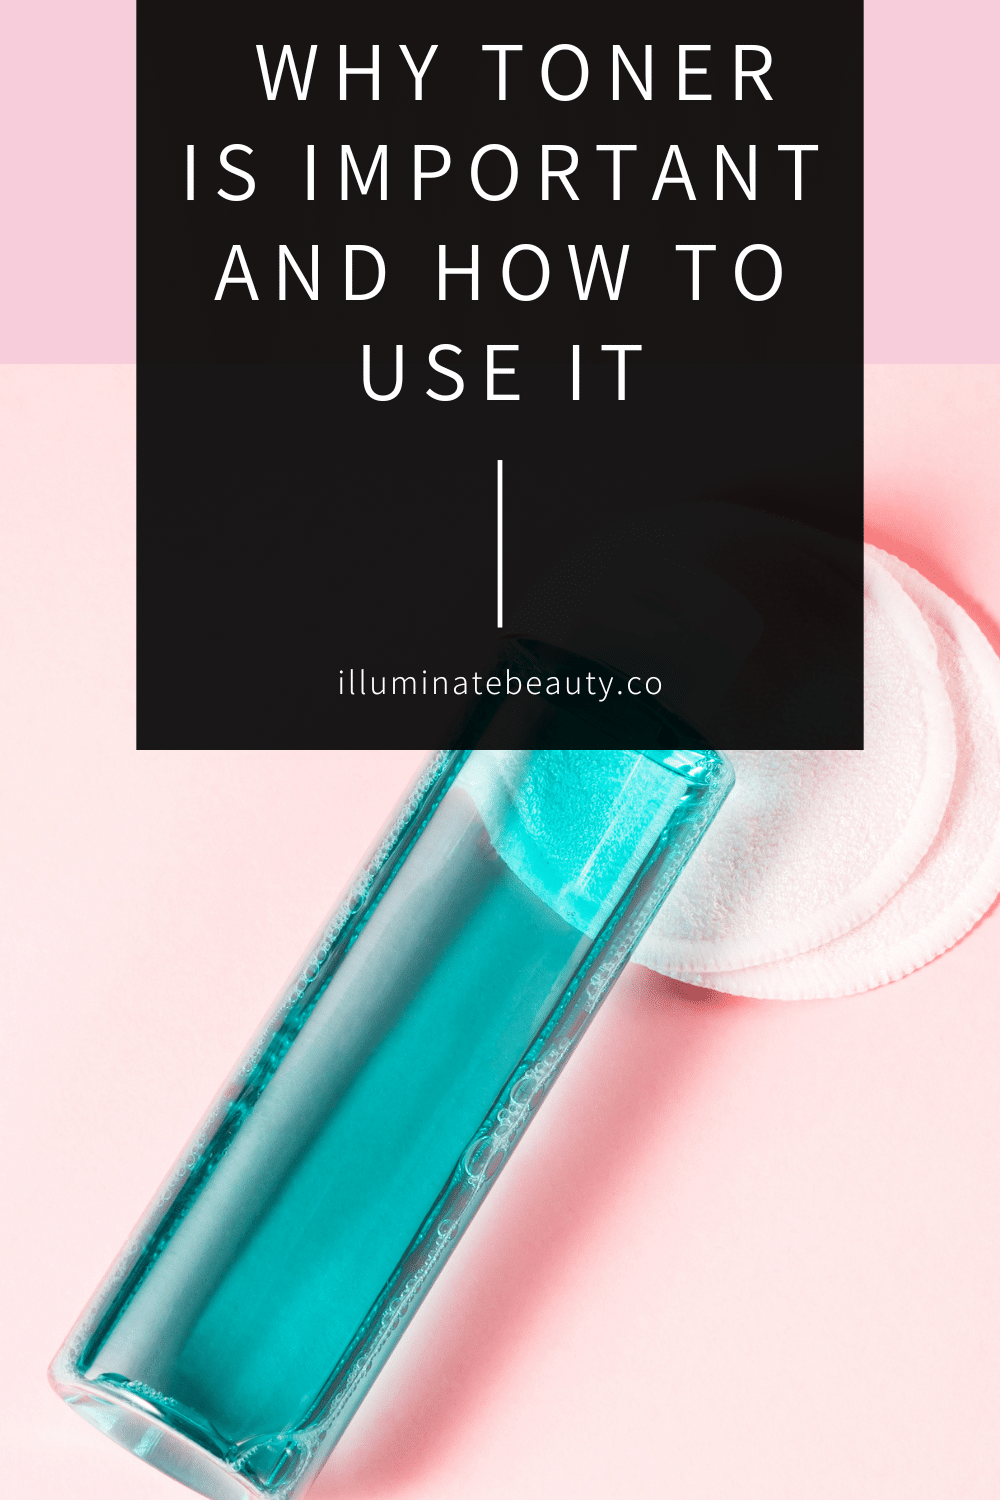  Why Toner is Important and How to Use It